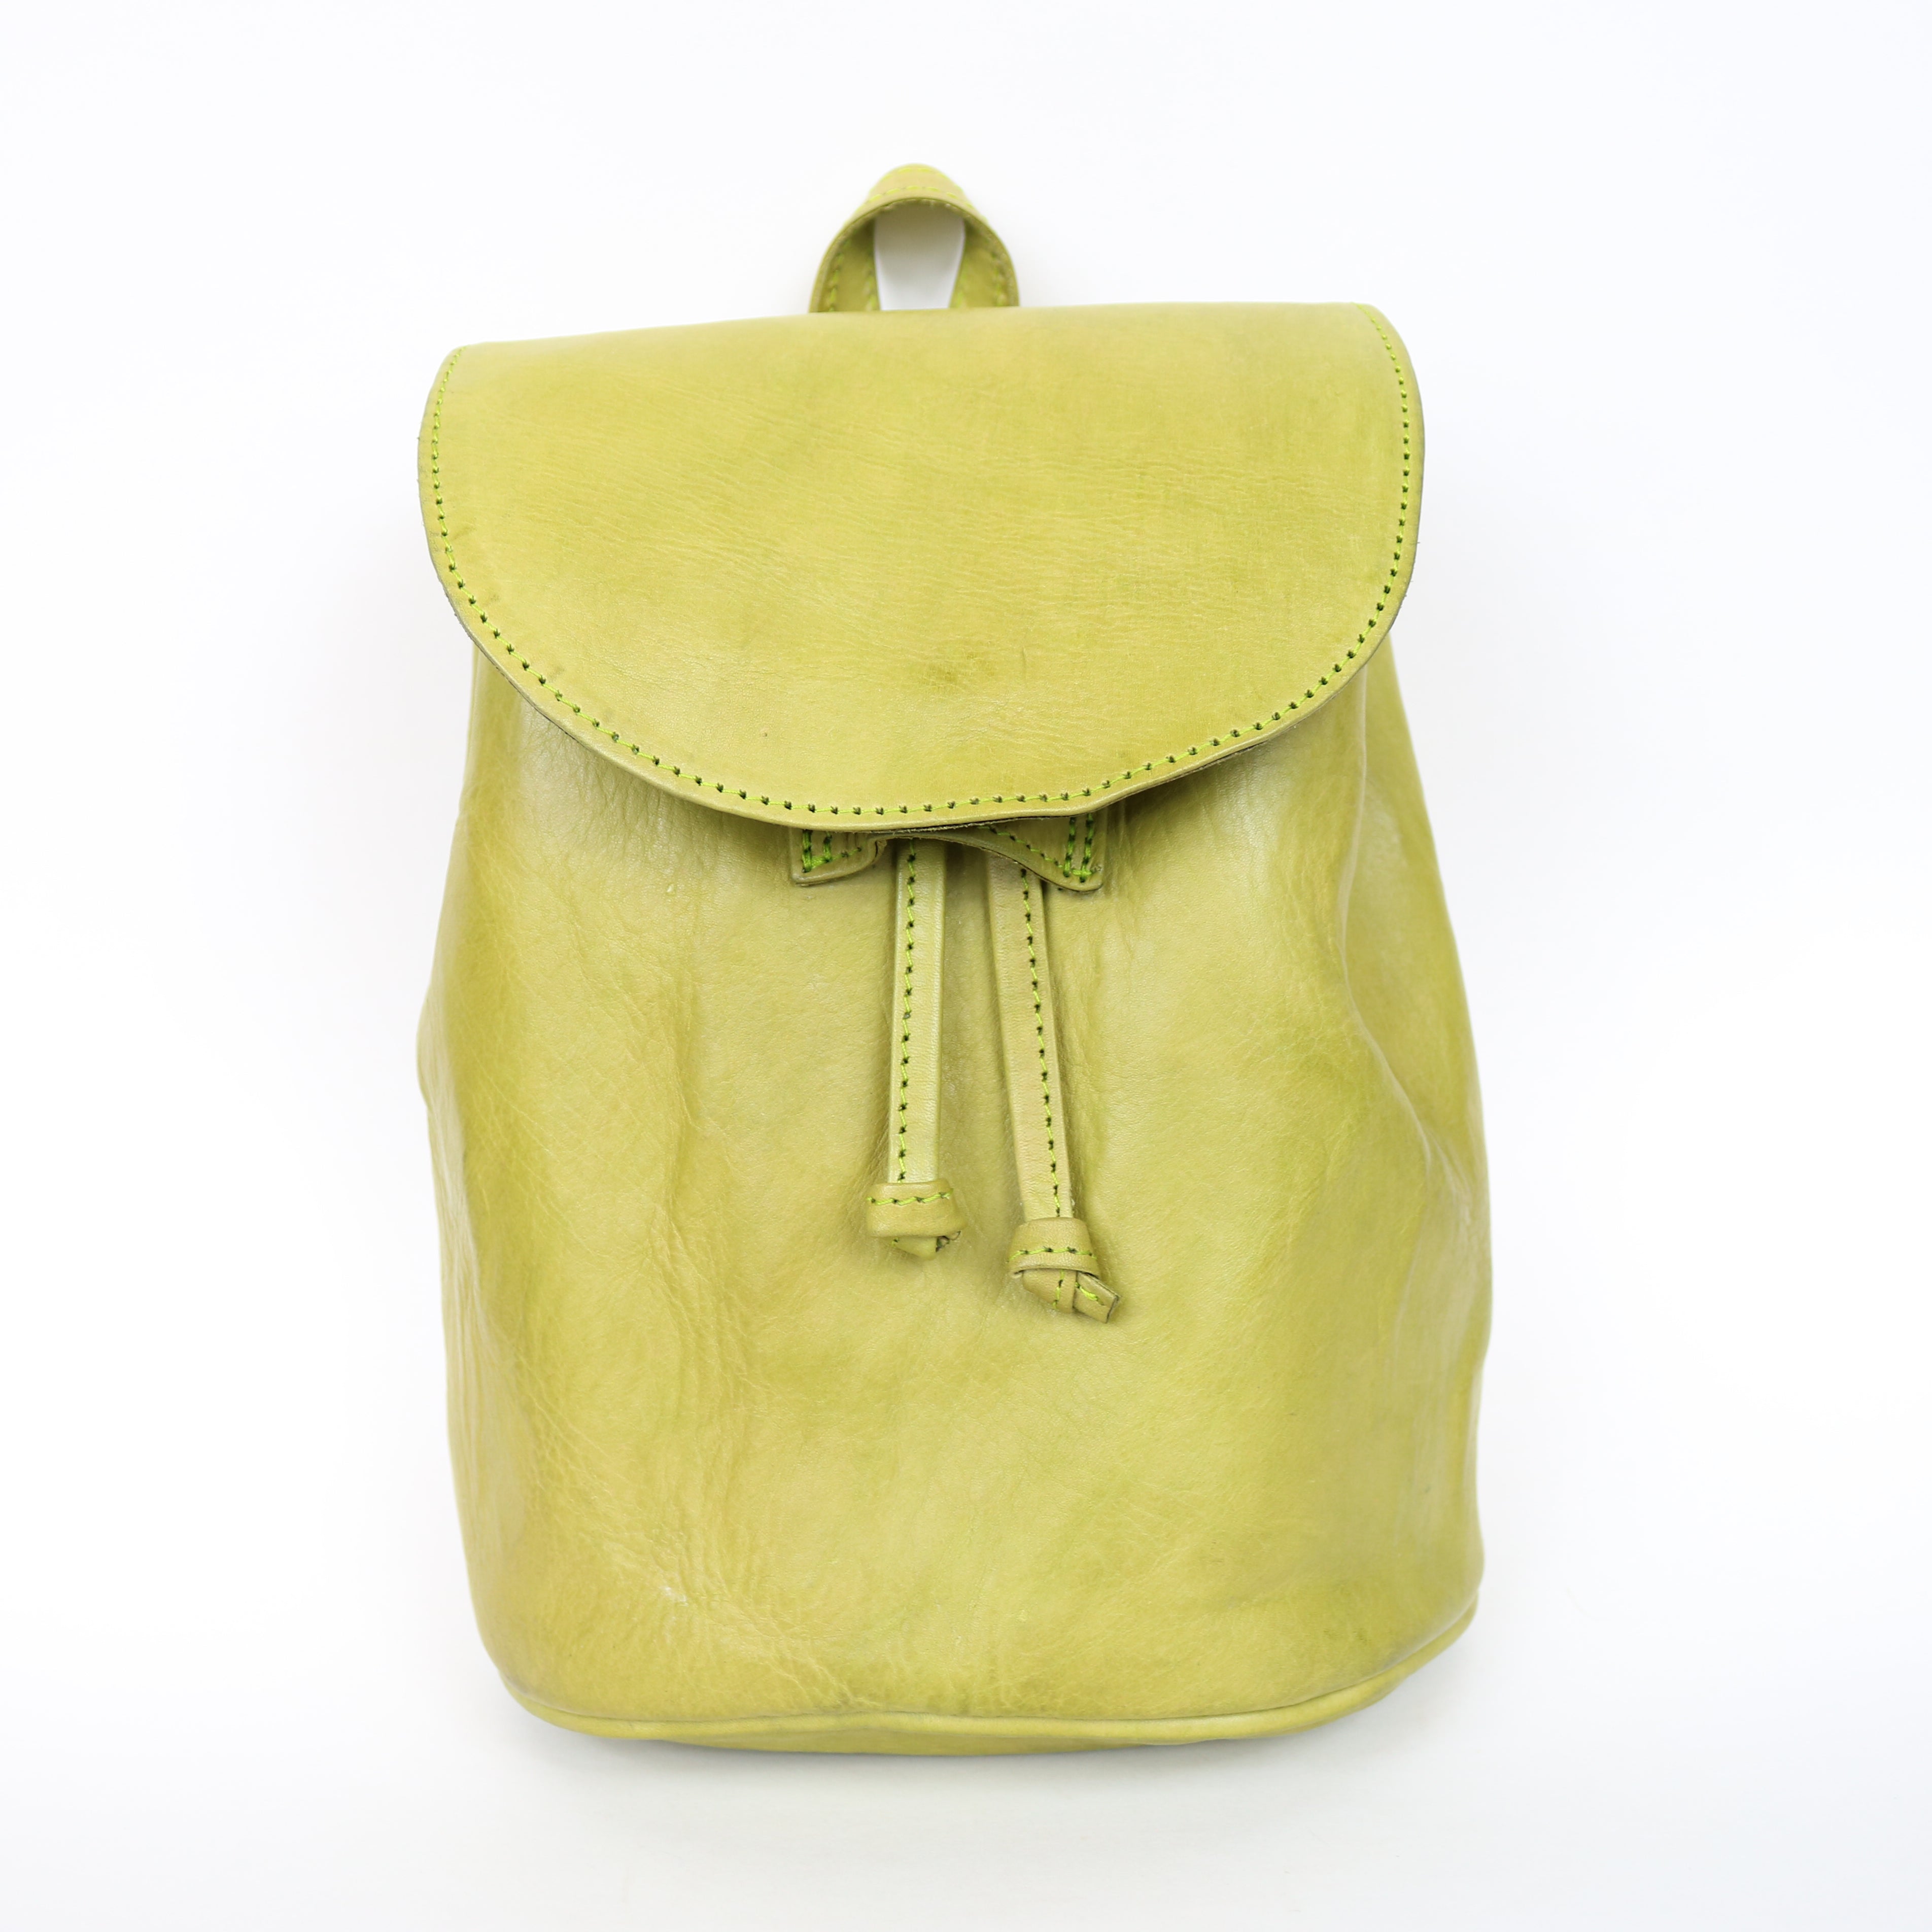 Bati | Women's Green Leather Backpack | Handmade Leather Goods from Paraguay | Leather Backpacks, Leather Bags, Leather Accessories